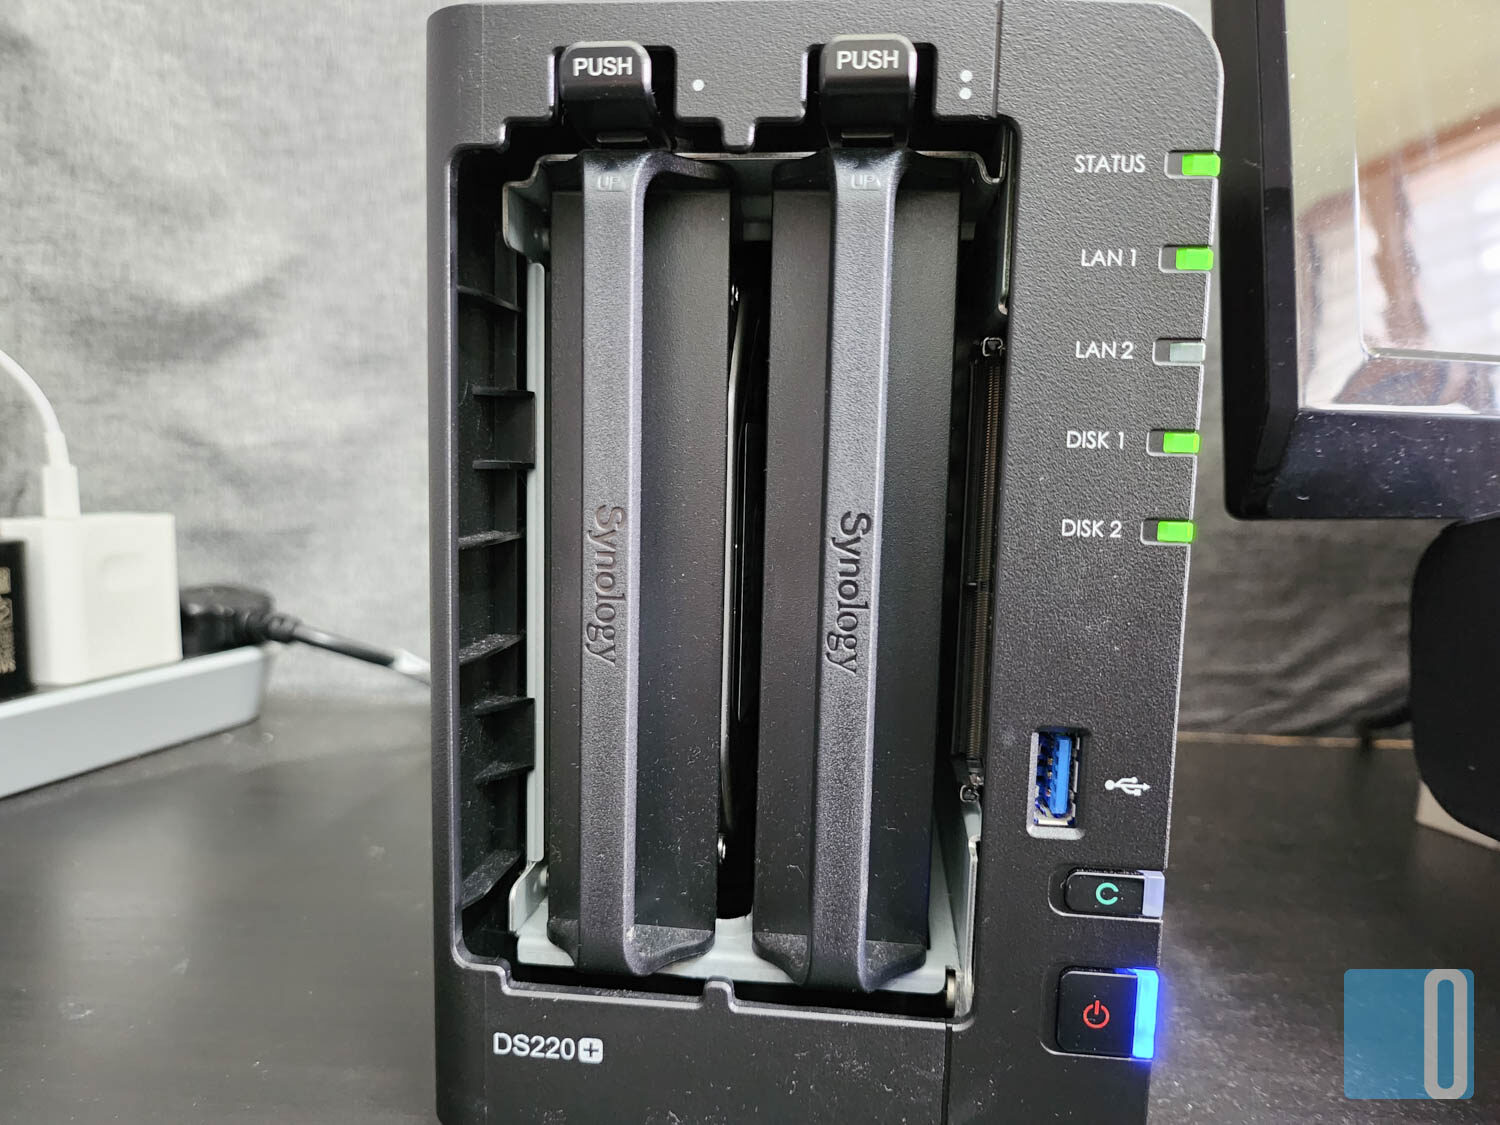 Synology DS220+ Network Attached Storage (NAS) Review And Why Digital Nomads Should Have One